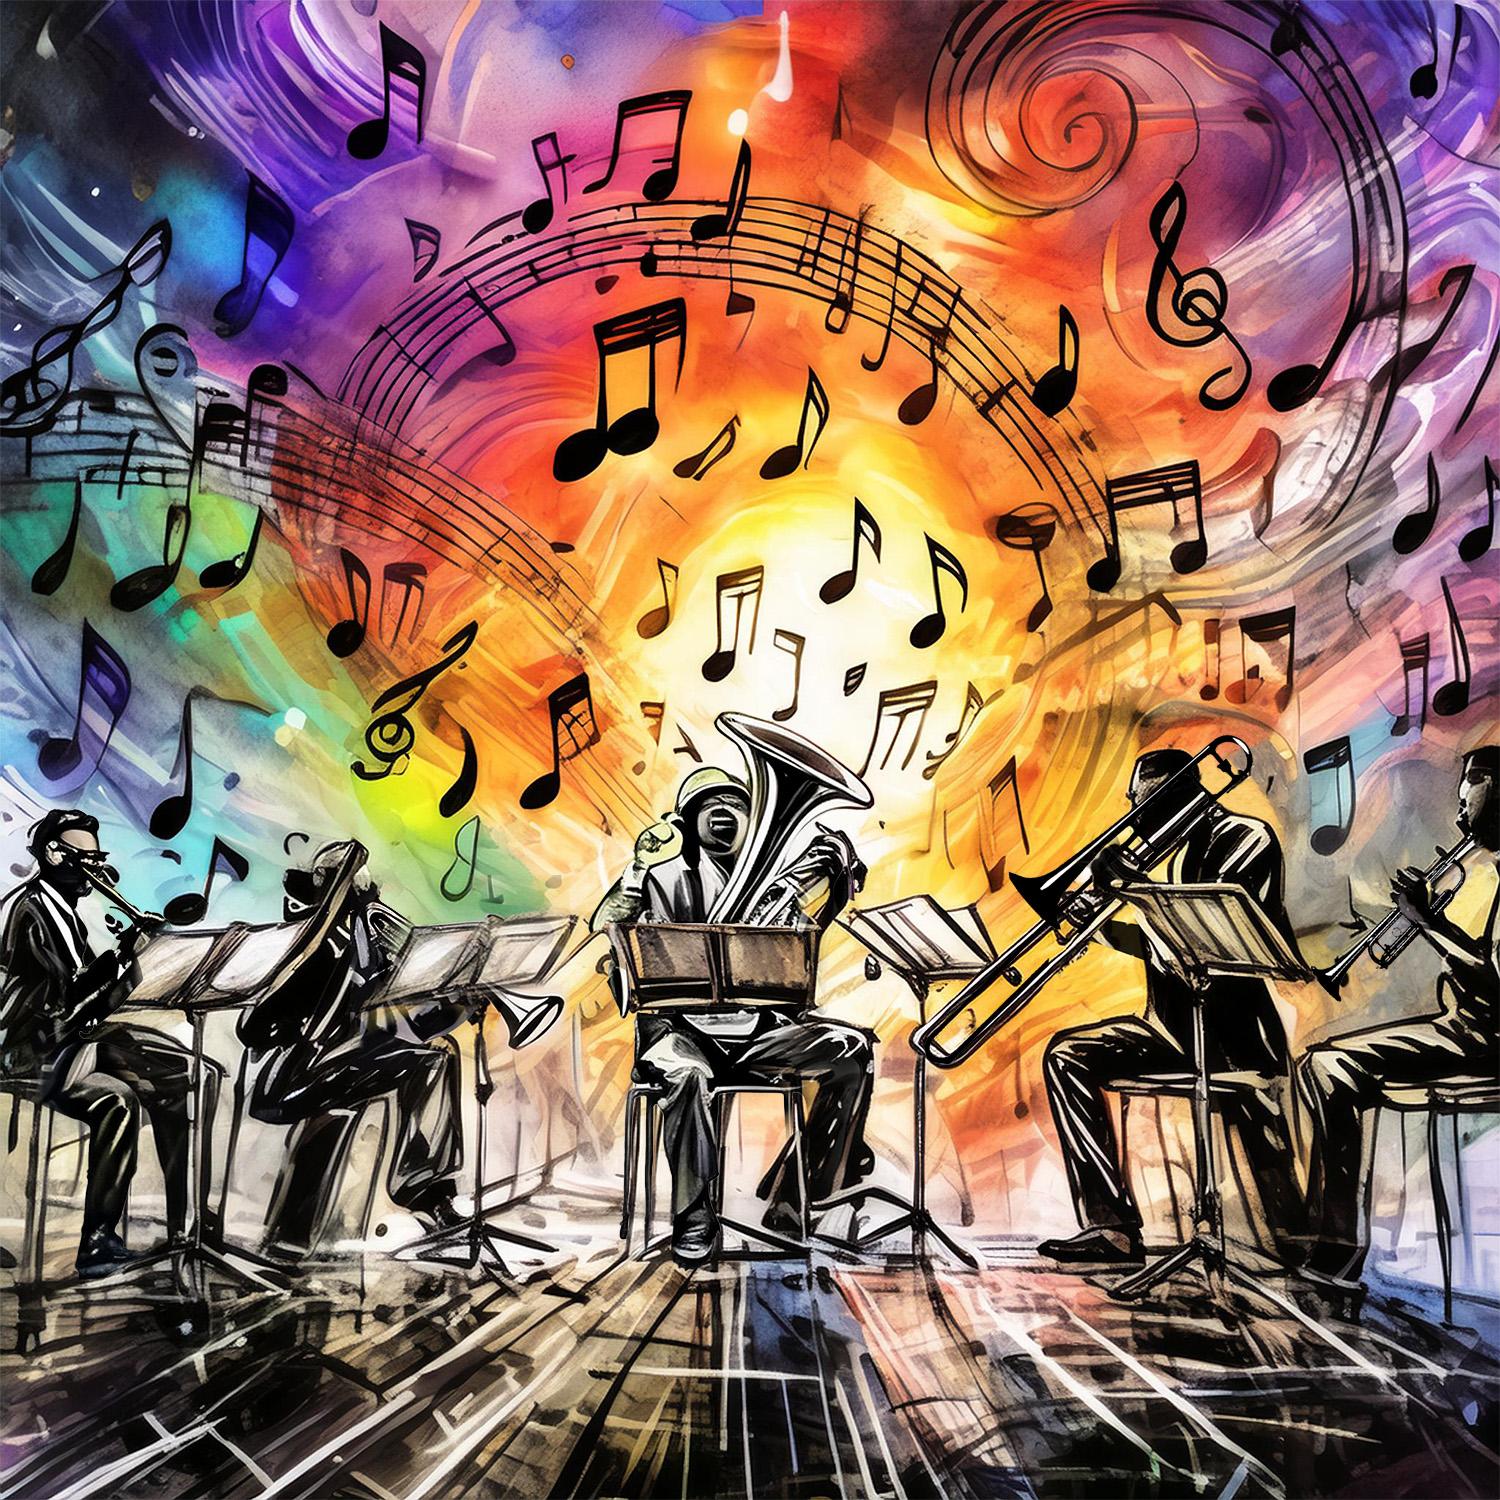 painted sketch: backlit brass ensemble playing expressively on a wood stage, colorful lighting and music notes behind them